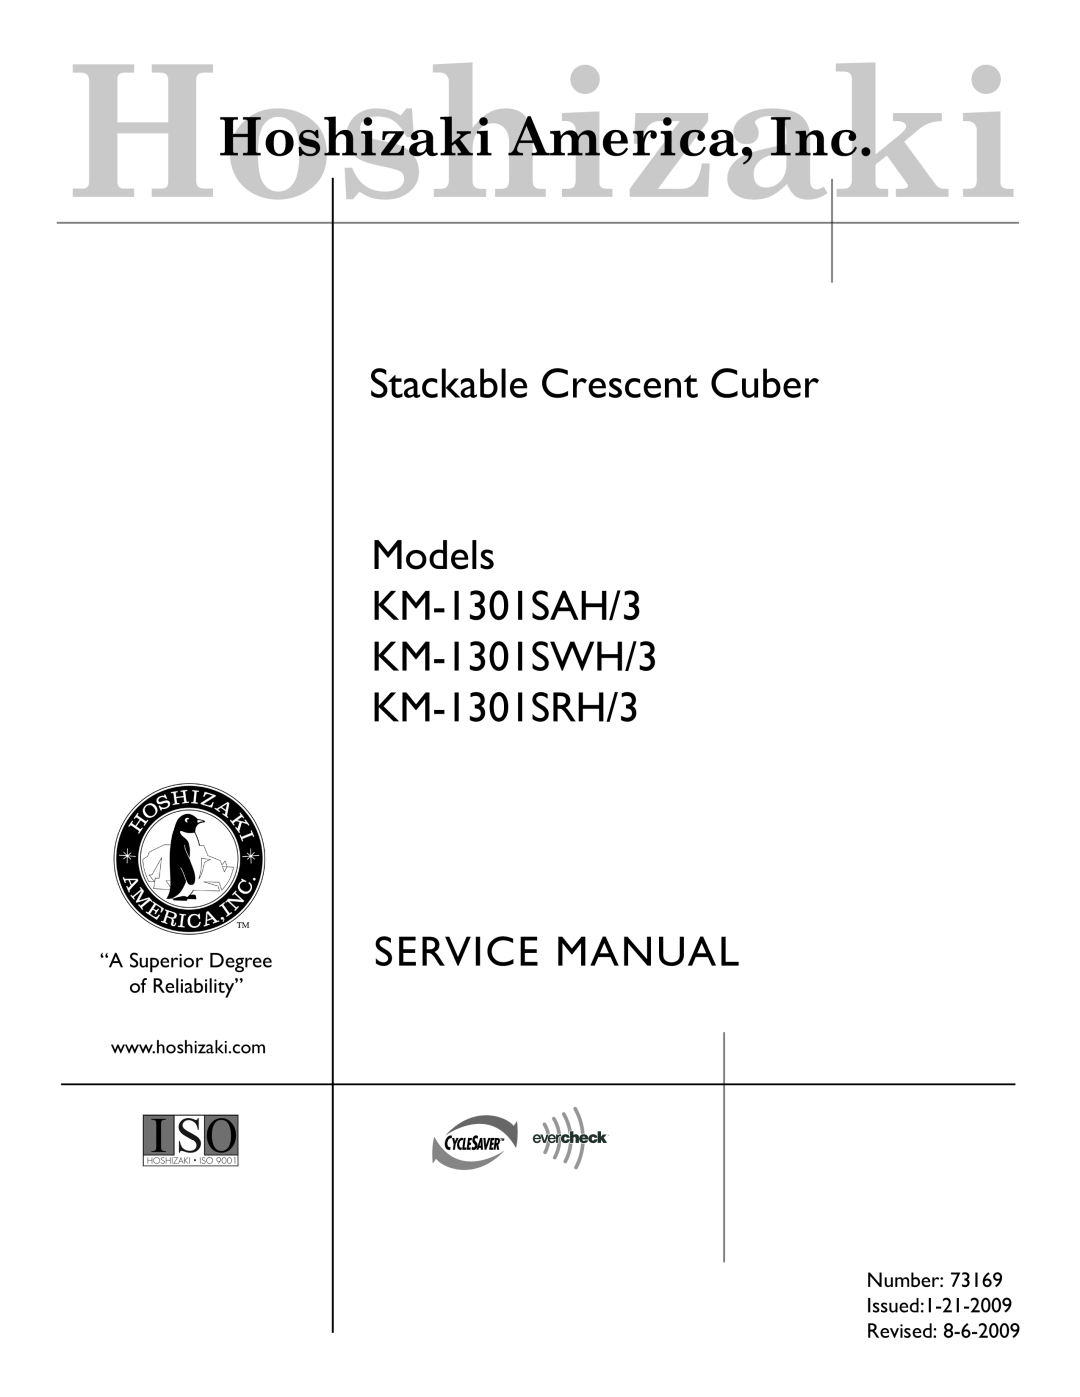 Hoshizaki SRH/3 KM-2100SWH3, SRH/3 KM-1400SWH-M, SWH/3 service manual Stackable Crescent Cuber Models, Service Manual 